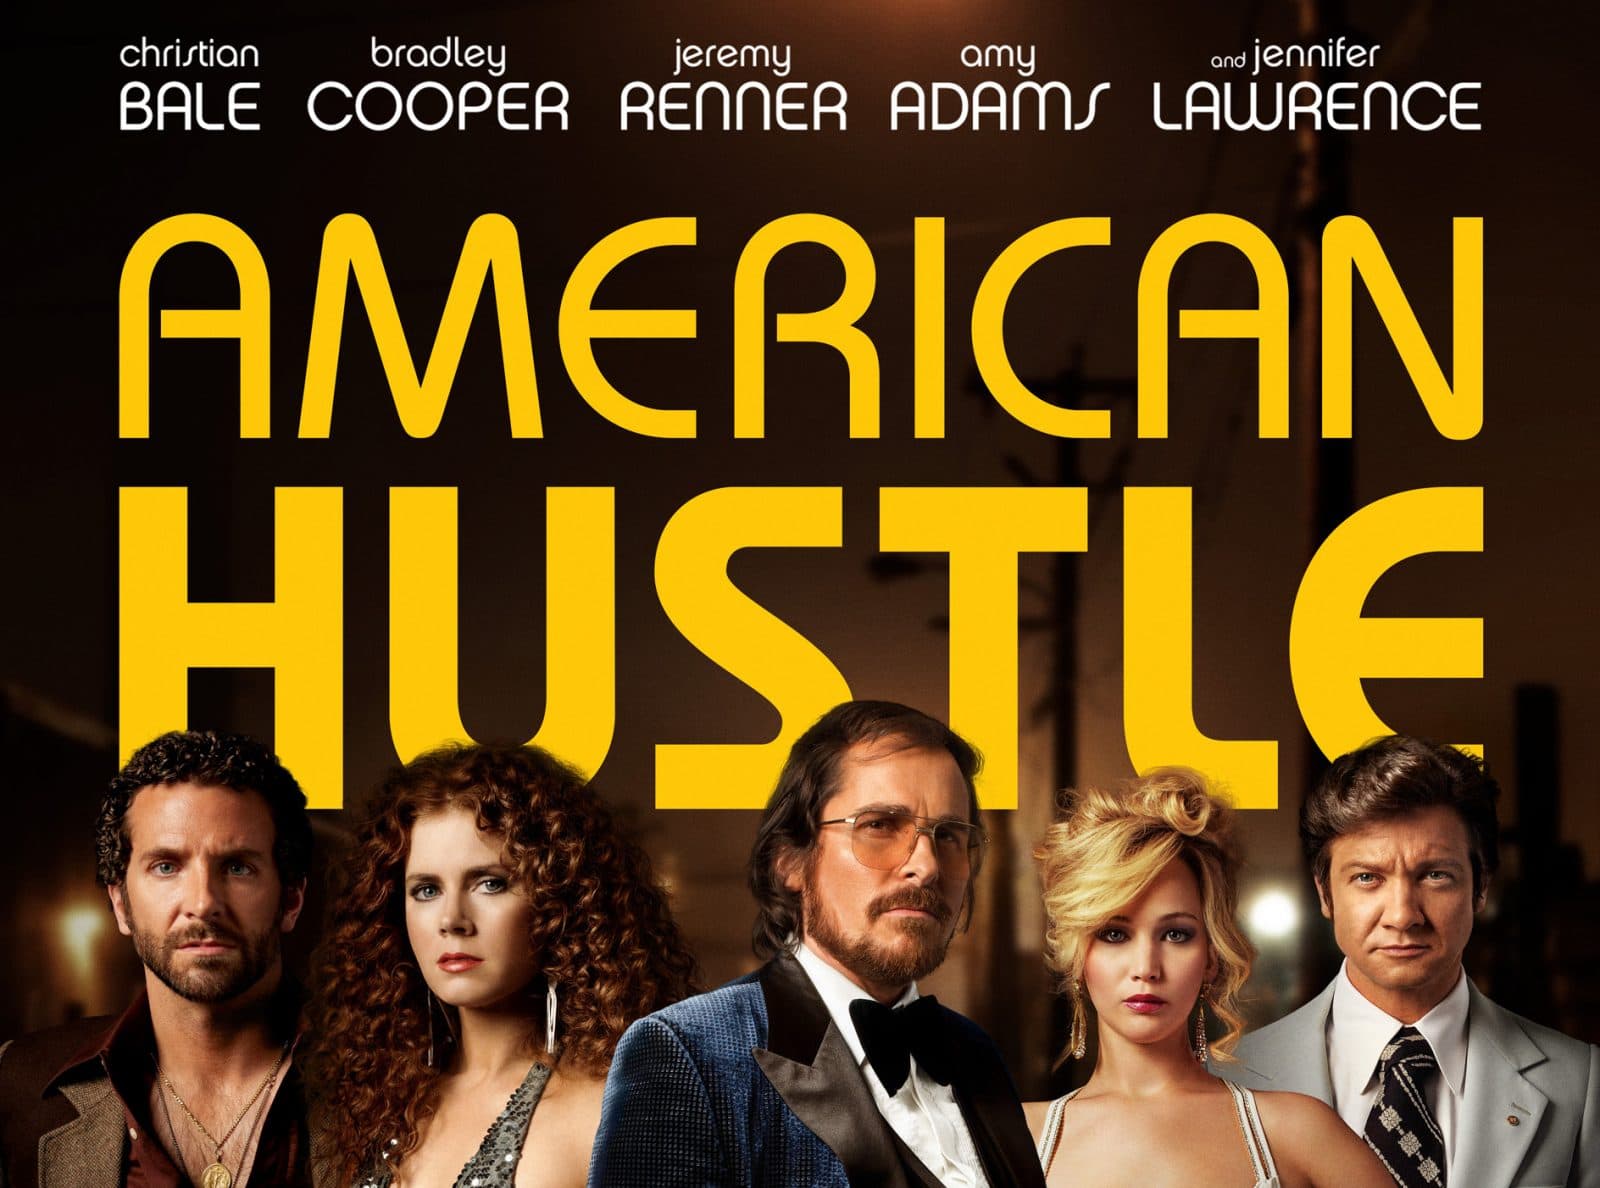 Persuasion Techniques in American Hustle - Reactance & The Liking Rule